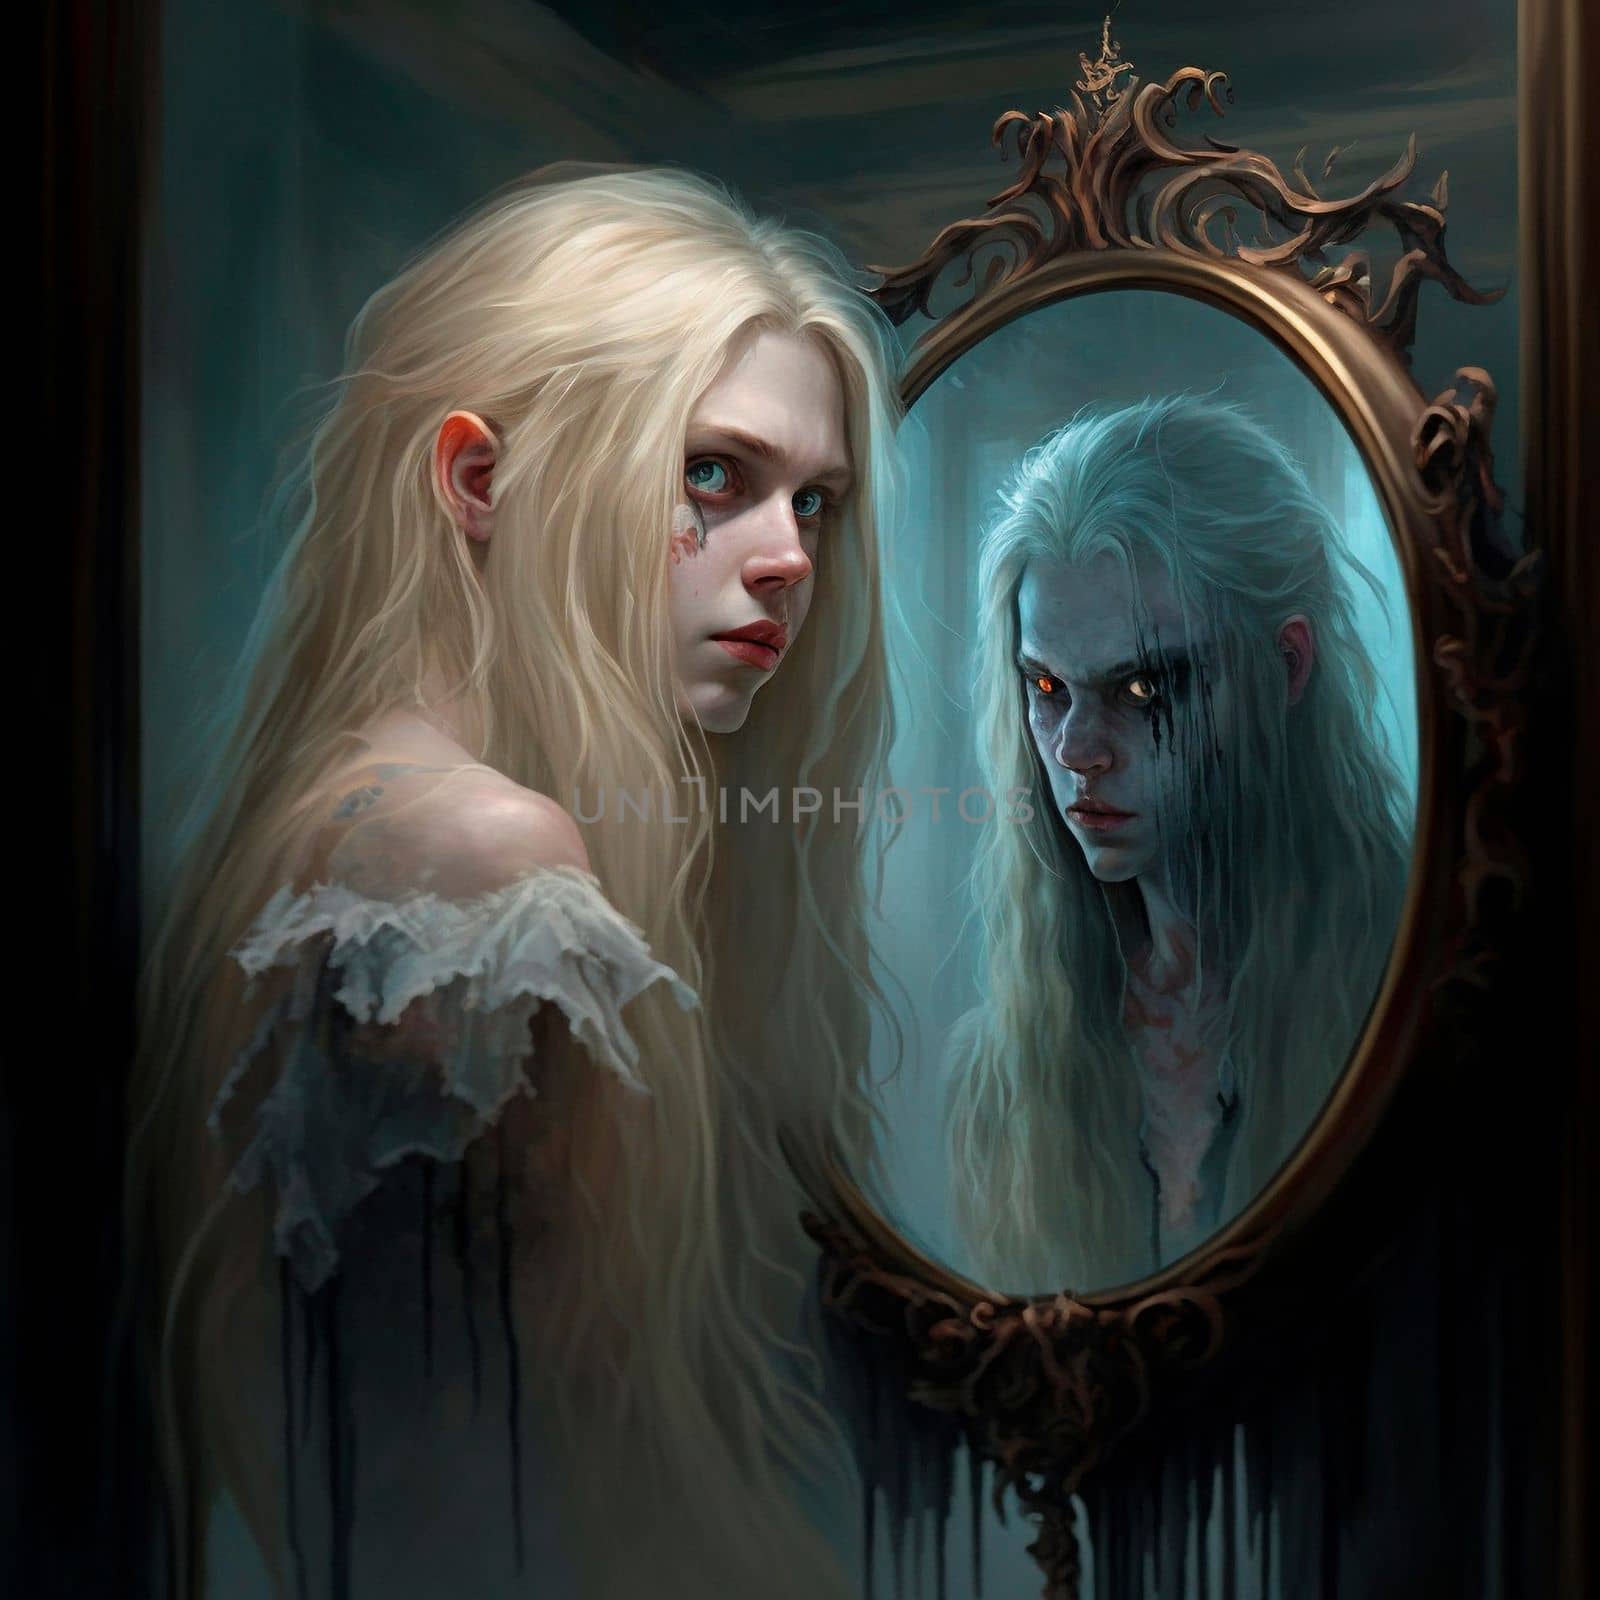 he girl sees a monster in the mirror instead of her reflection by NeuroSky